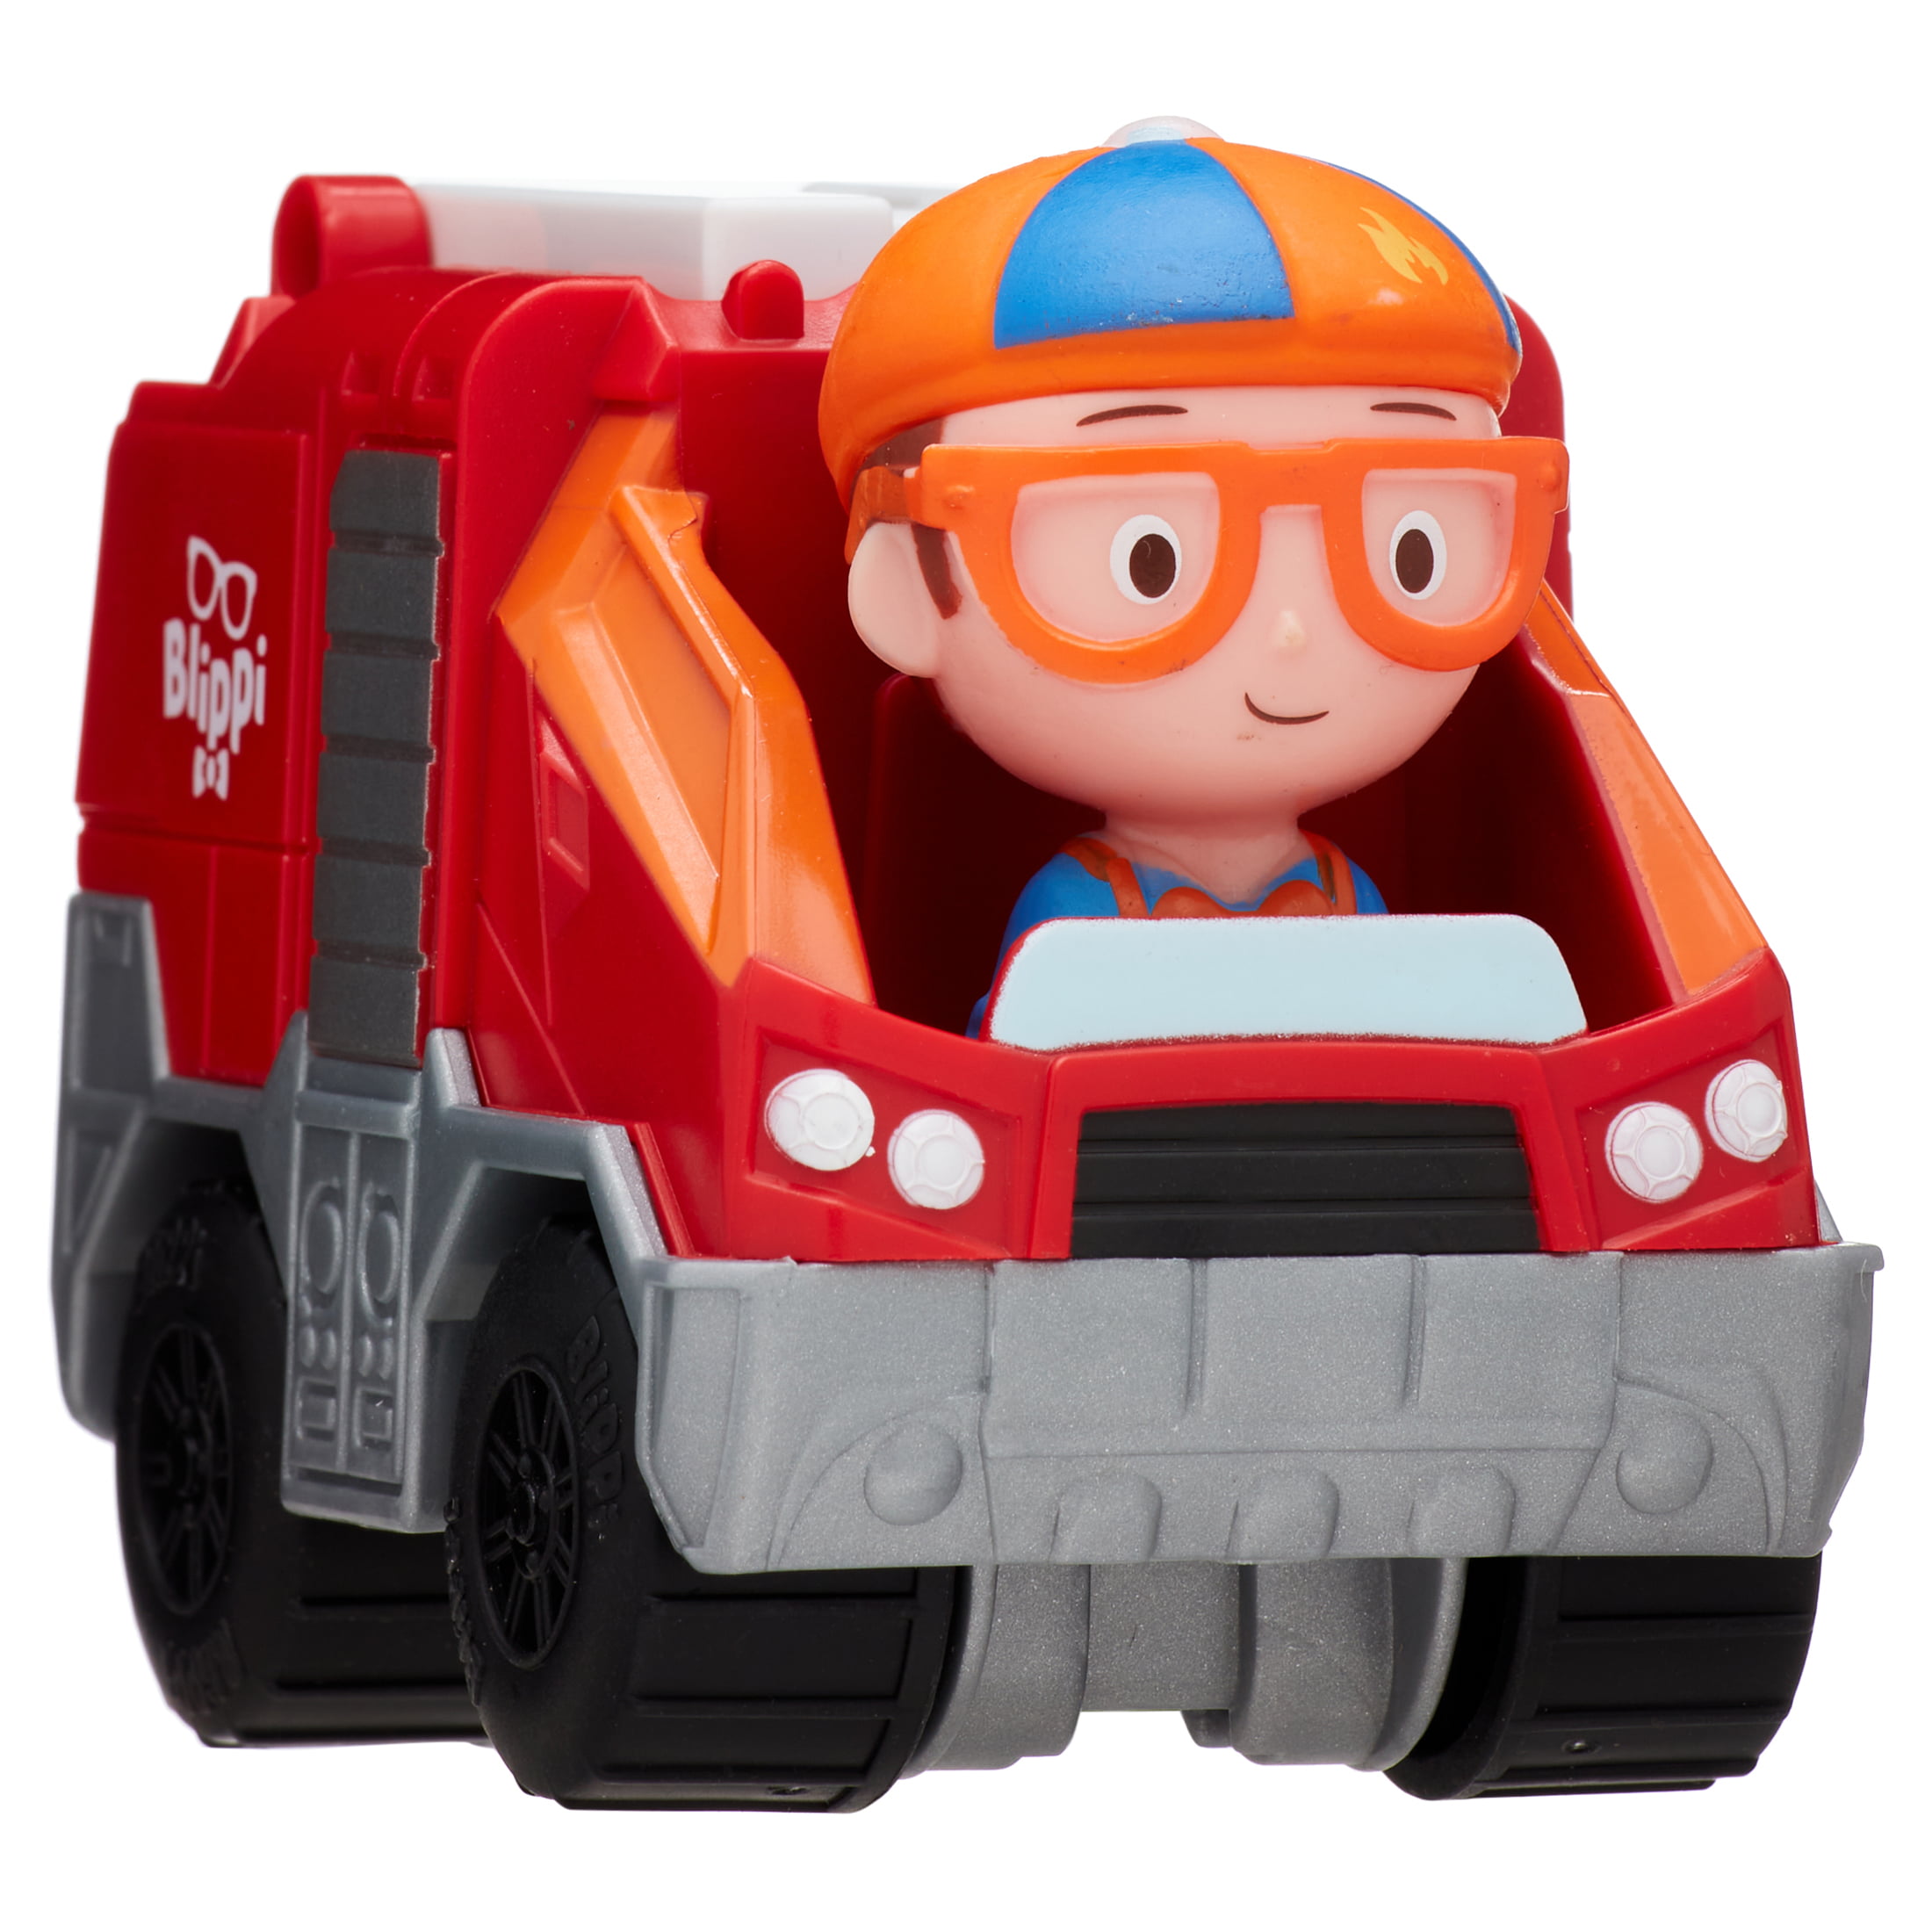 Limited Edition Blippi Mini Vehicles 2 Pack Excavator and Fire Truck 